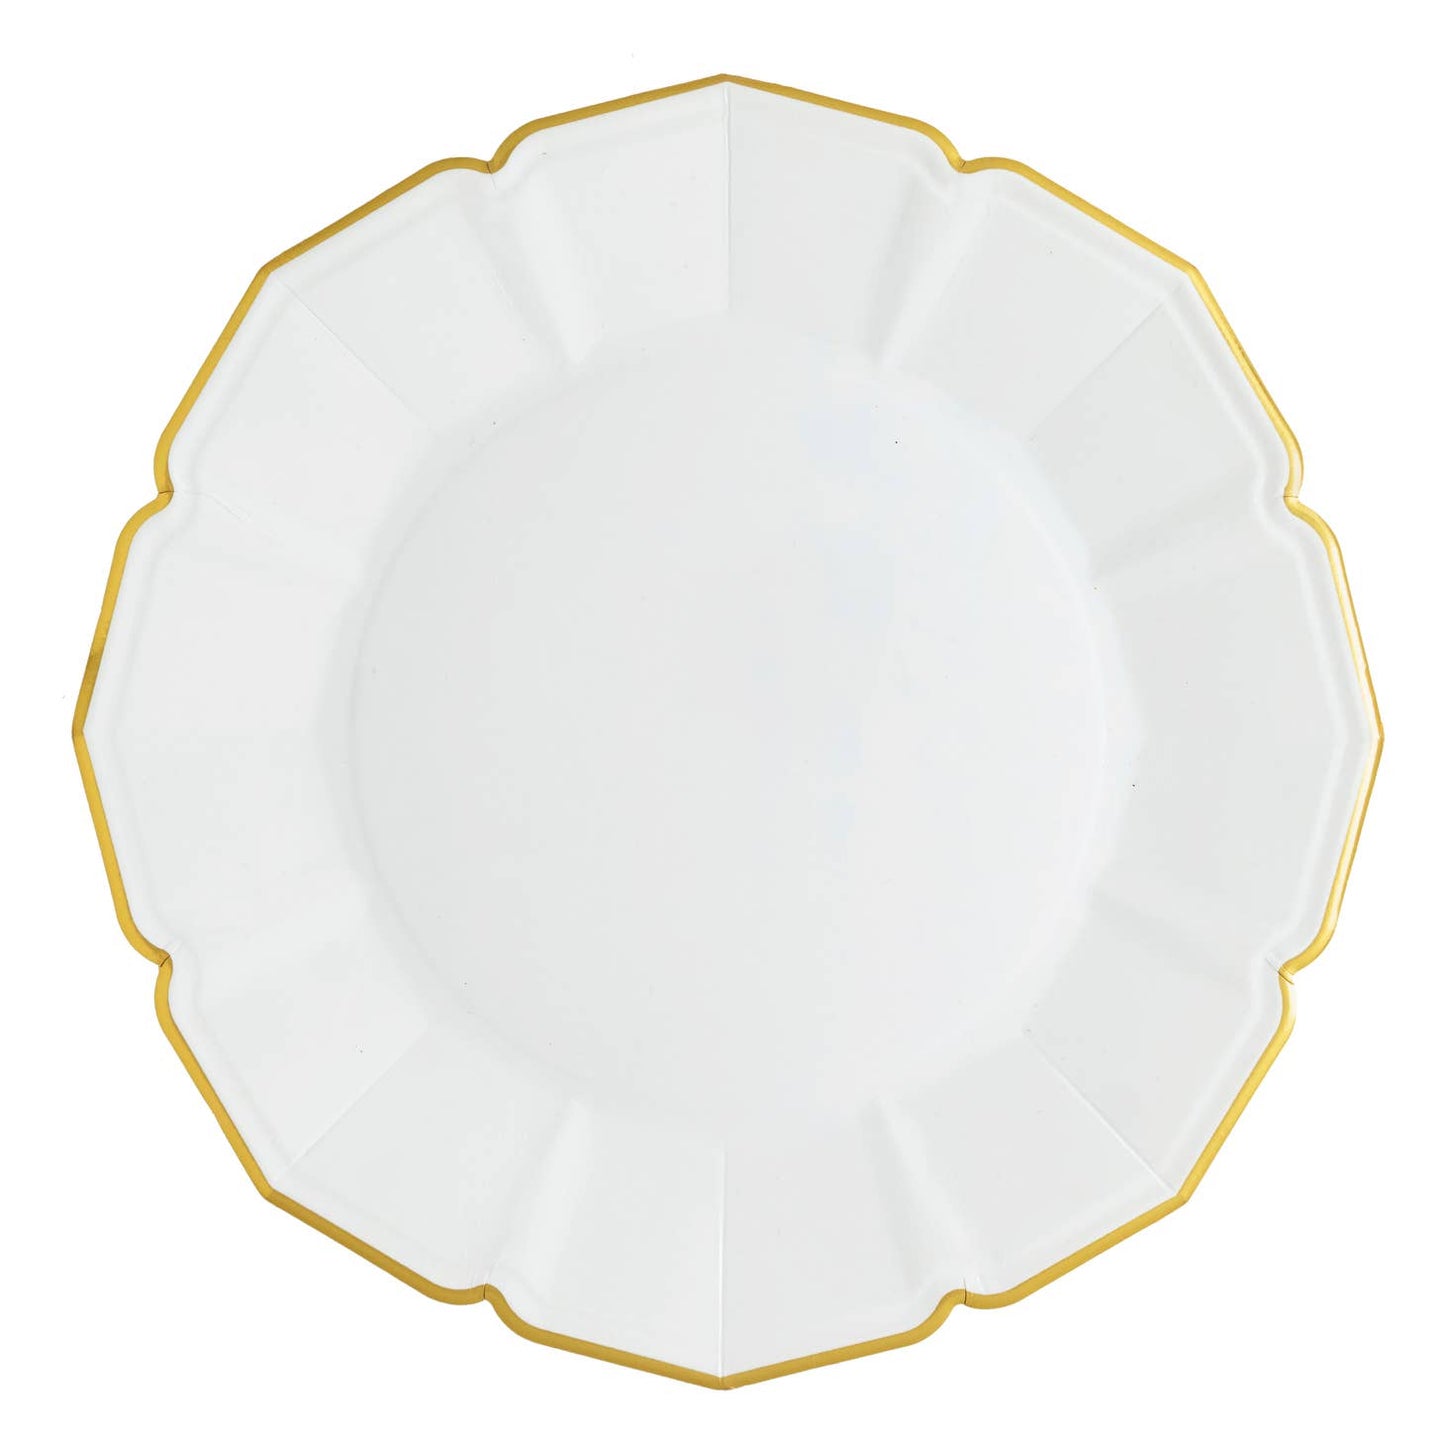 White Dinner Plates With Gold Trim